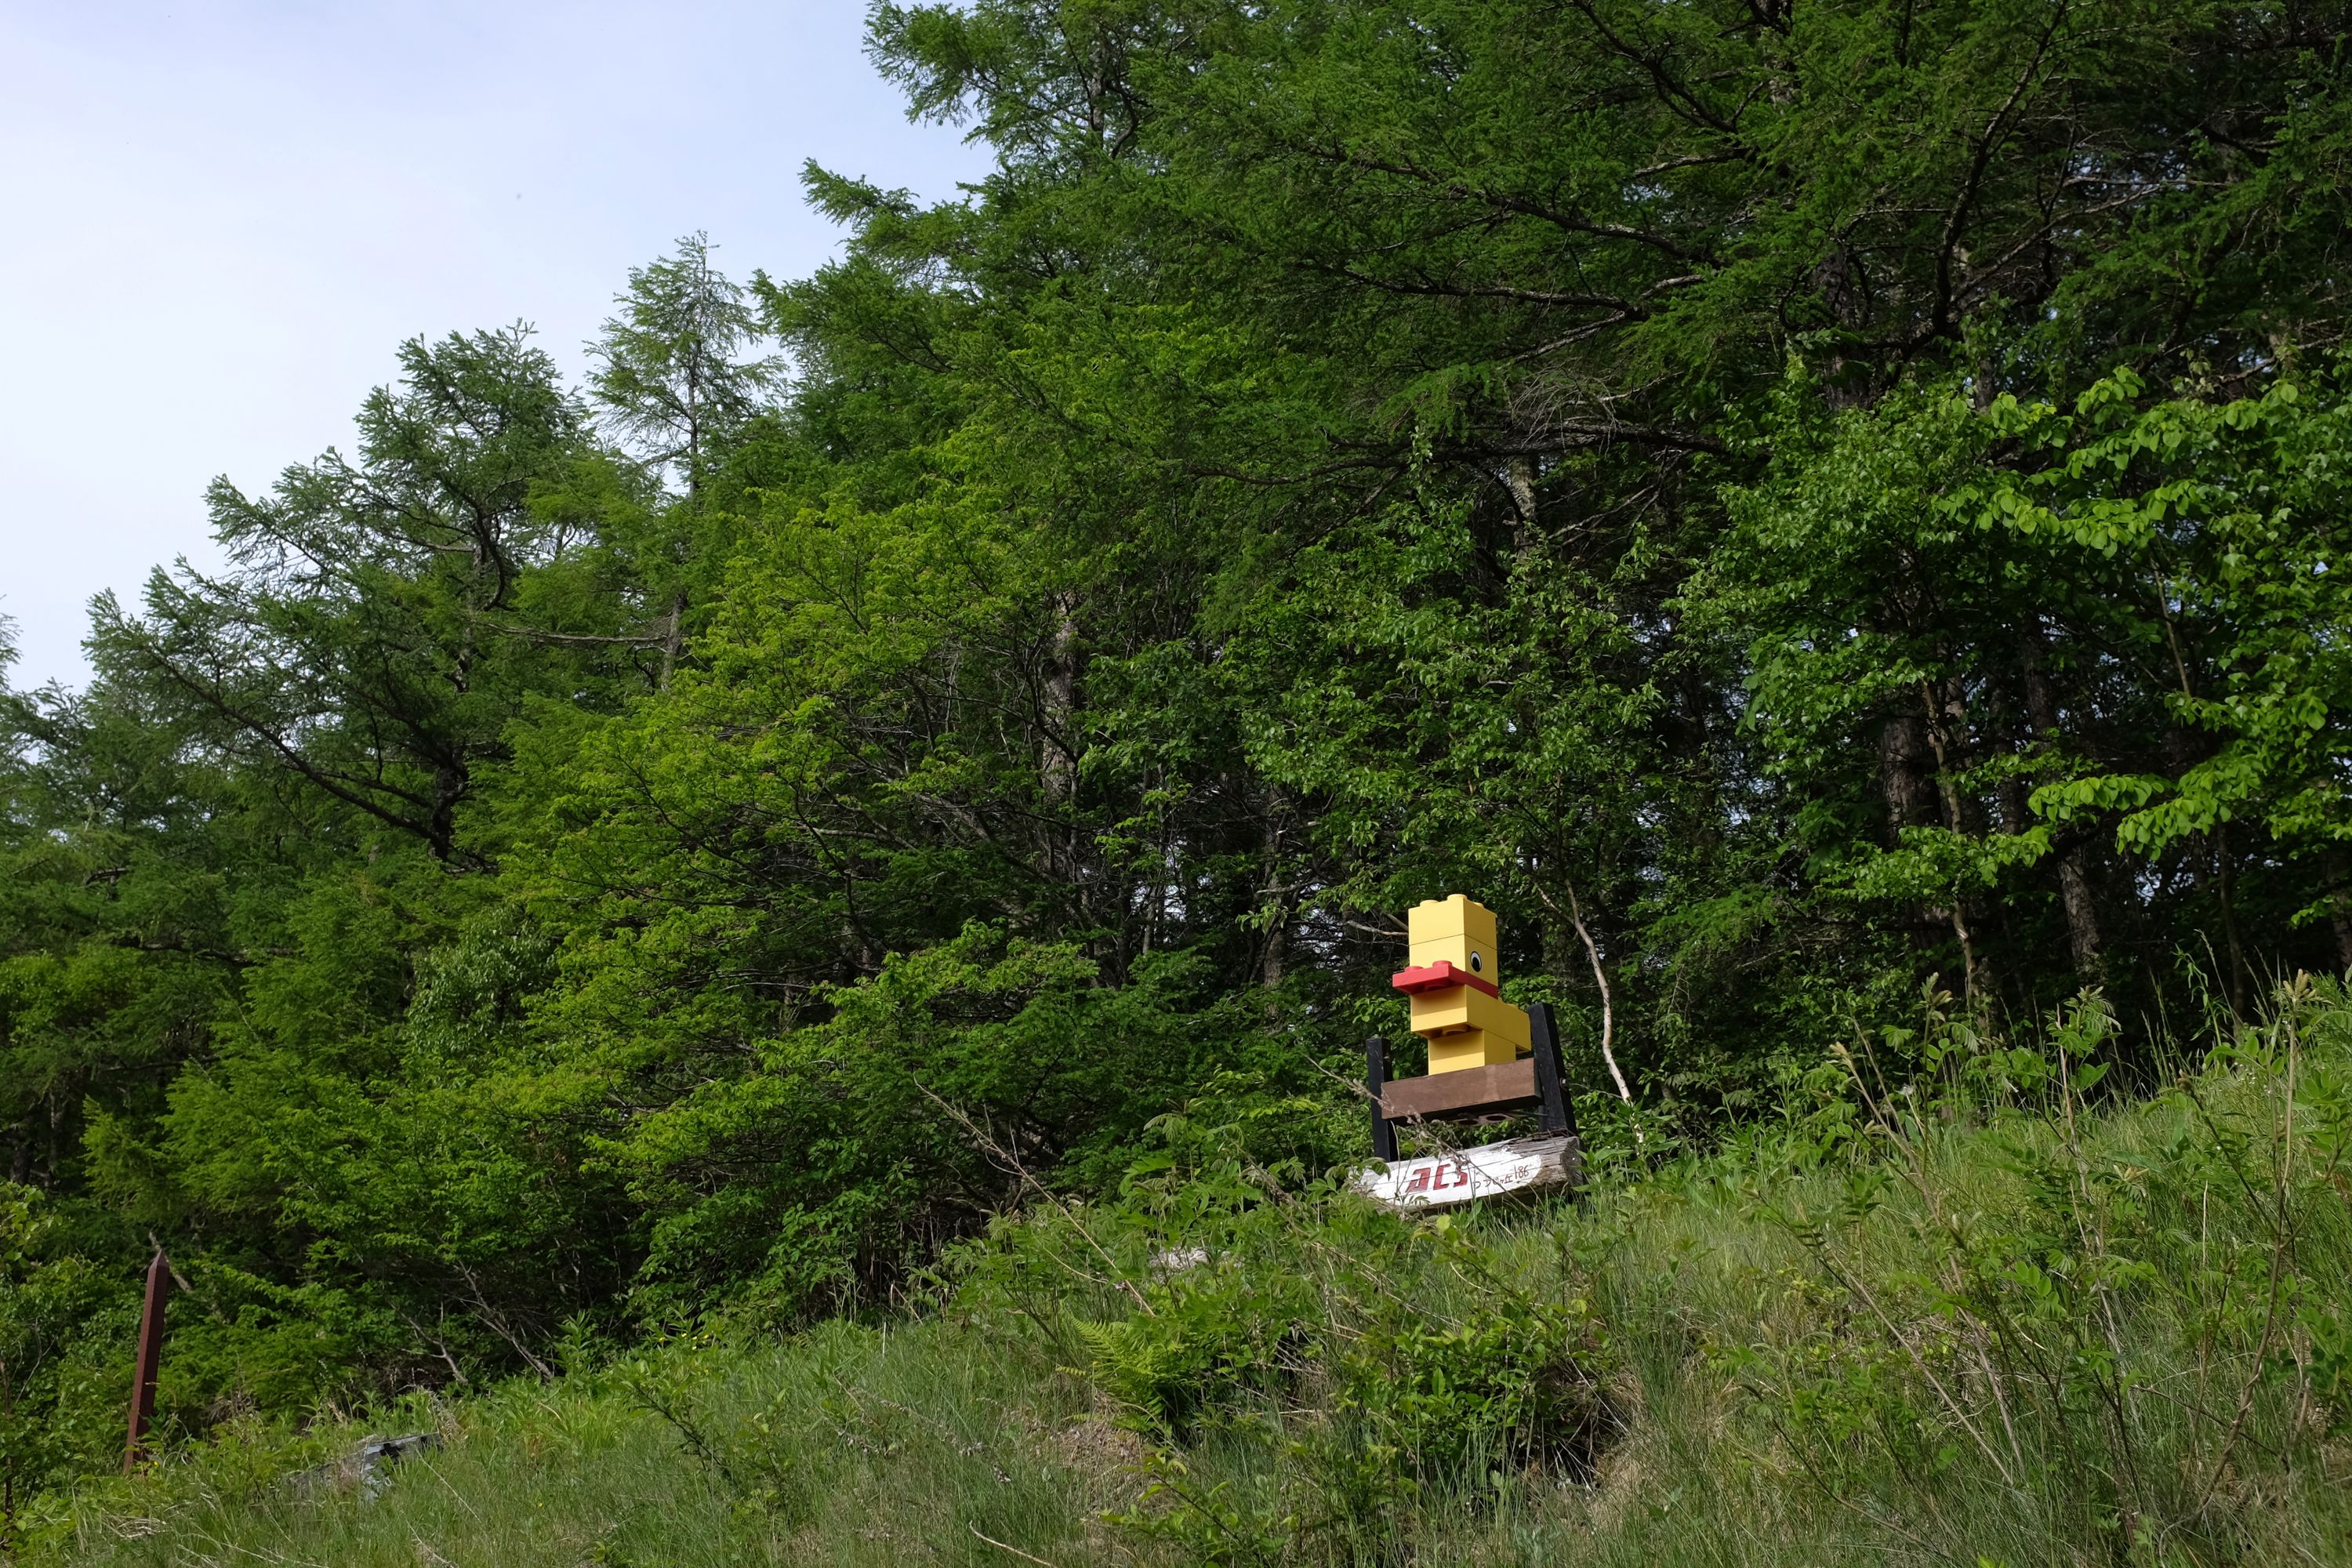 A large yellow Lego duck stands in the forest.